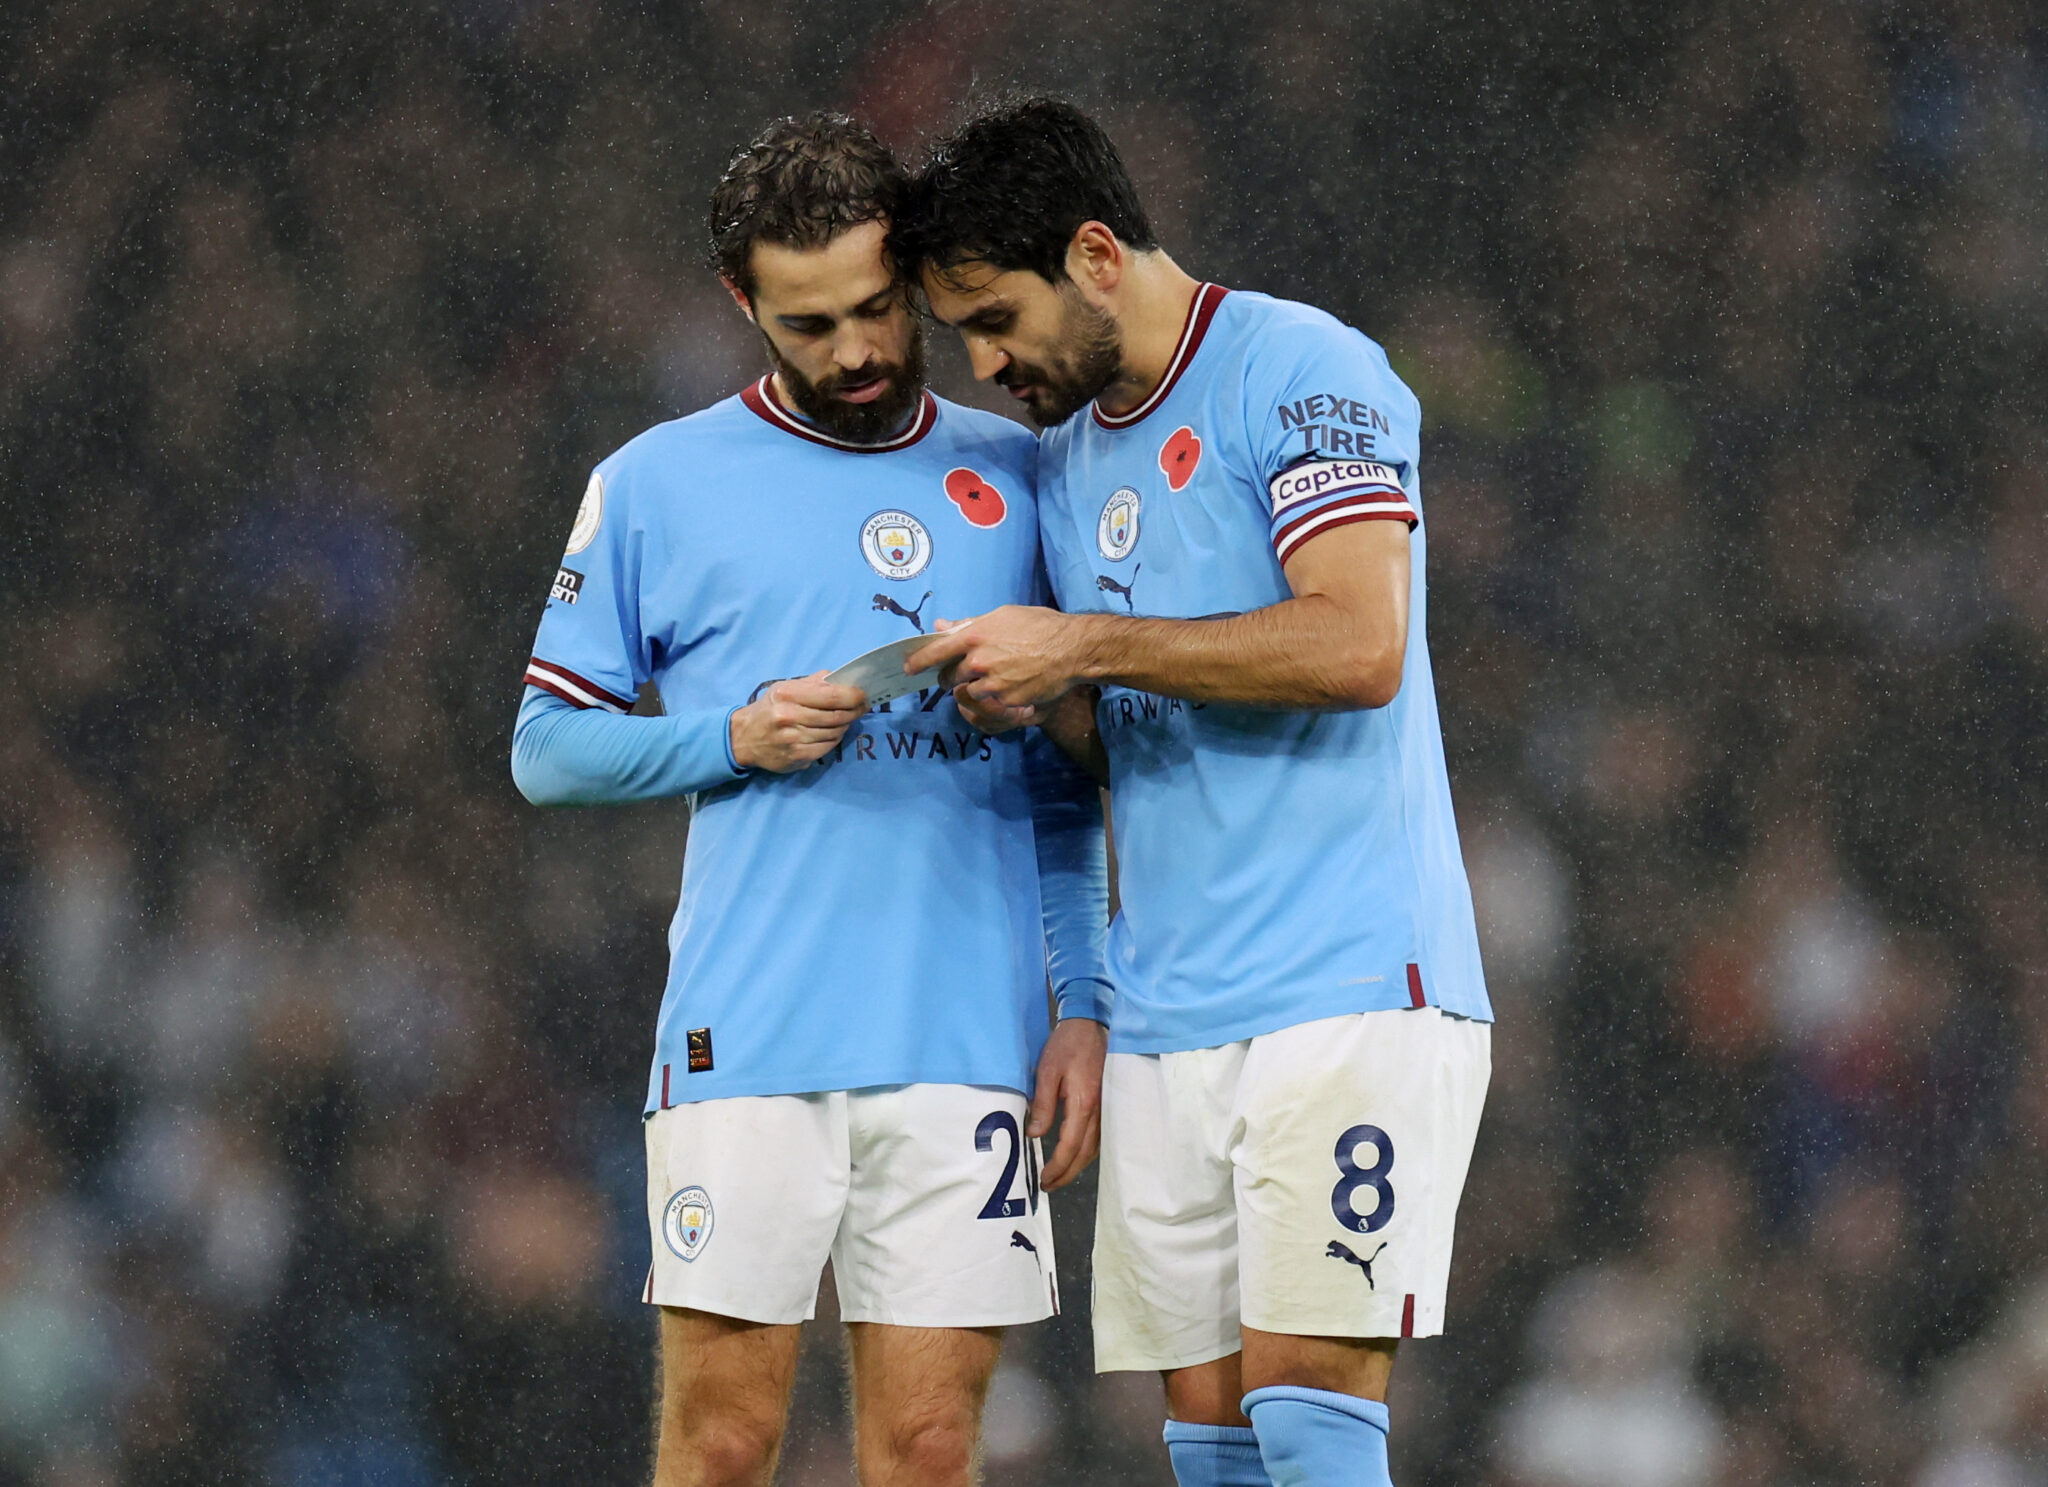 Ilkay Gundogan would not be used as Sergio Busquets replacement at Barcelona